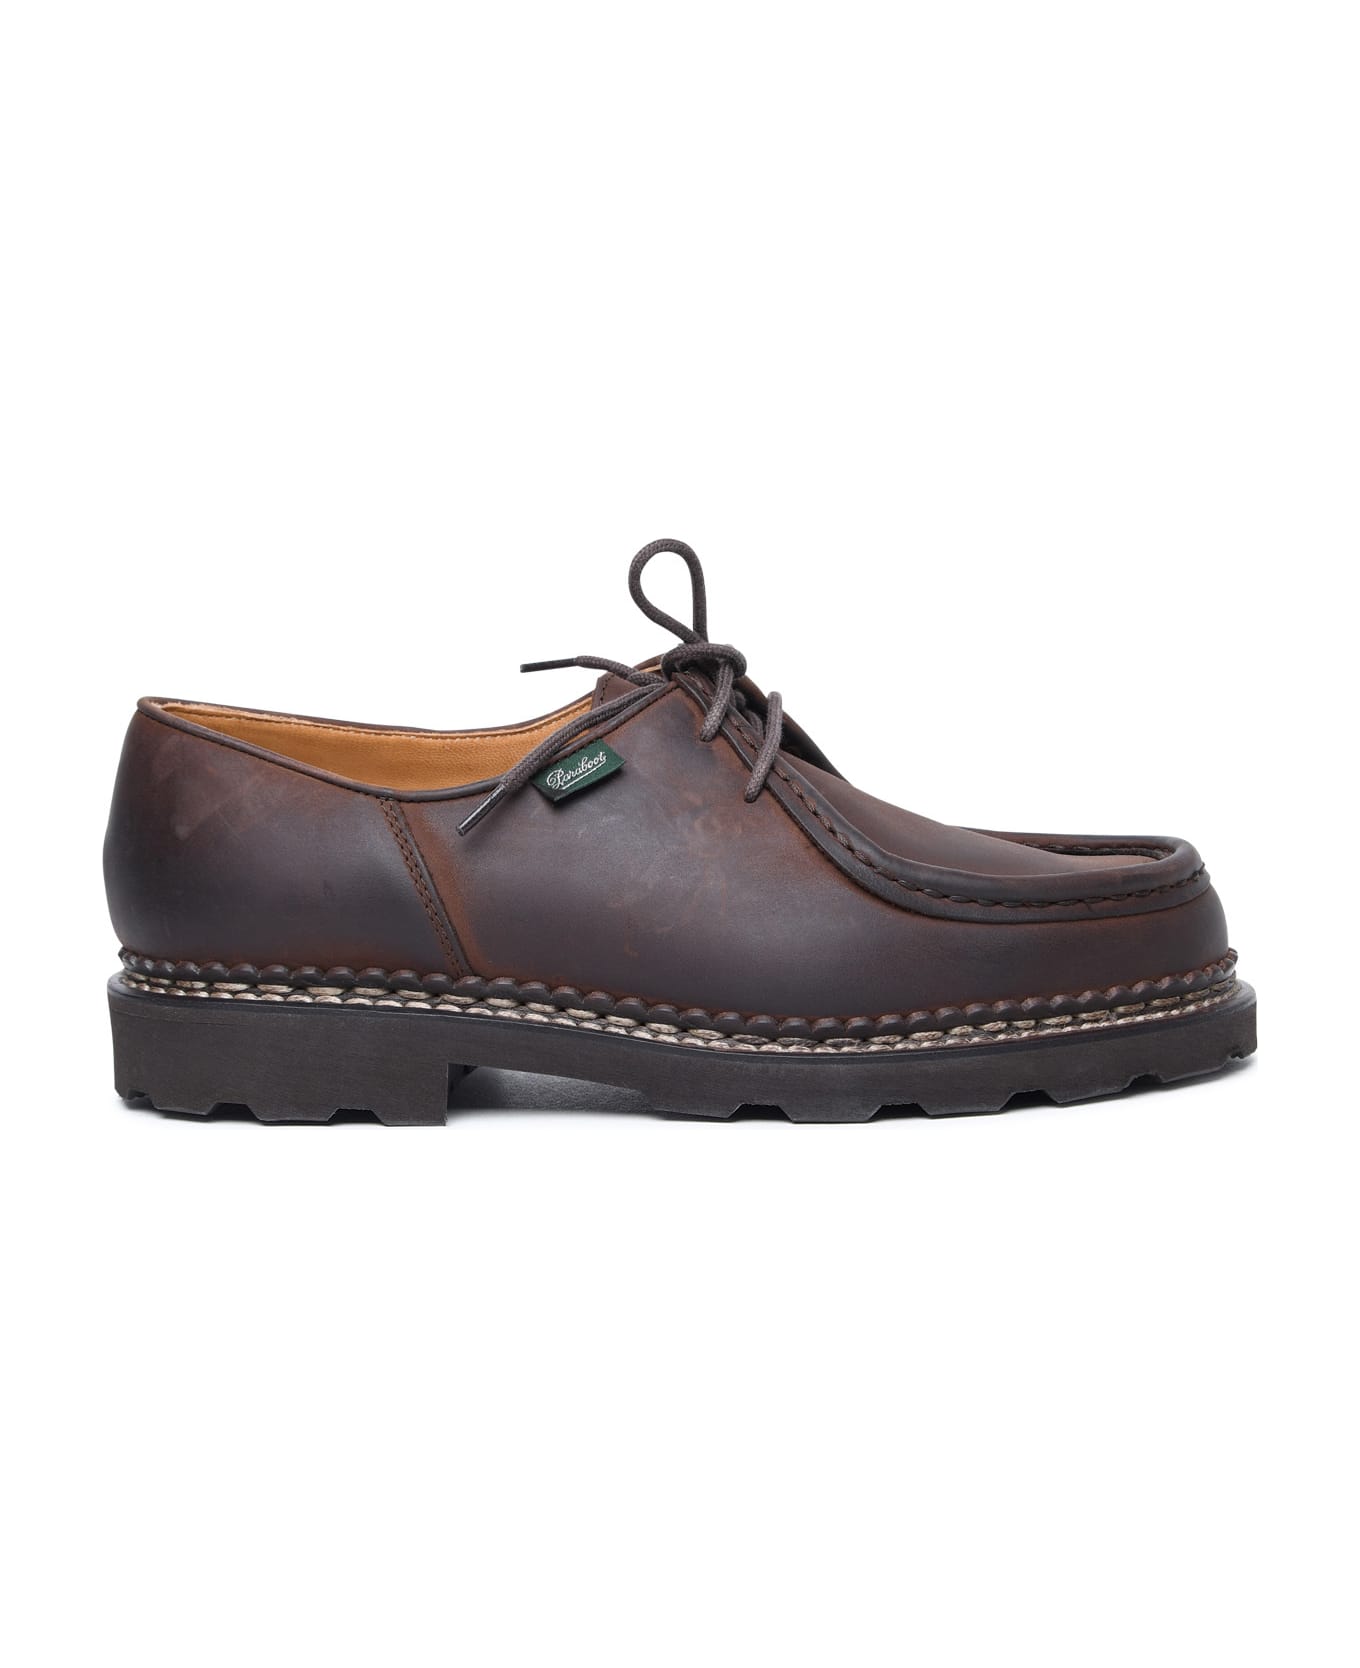 Paraboot 'michael' Brown Leather Derby Shoes - Brown ローファー＆デッキシューズ